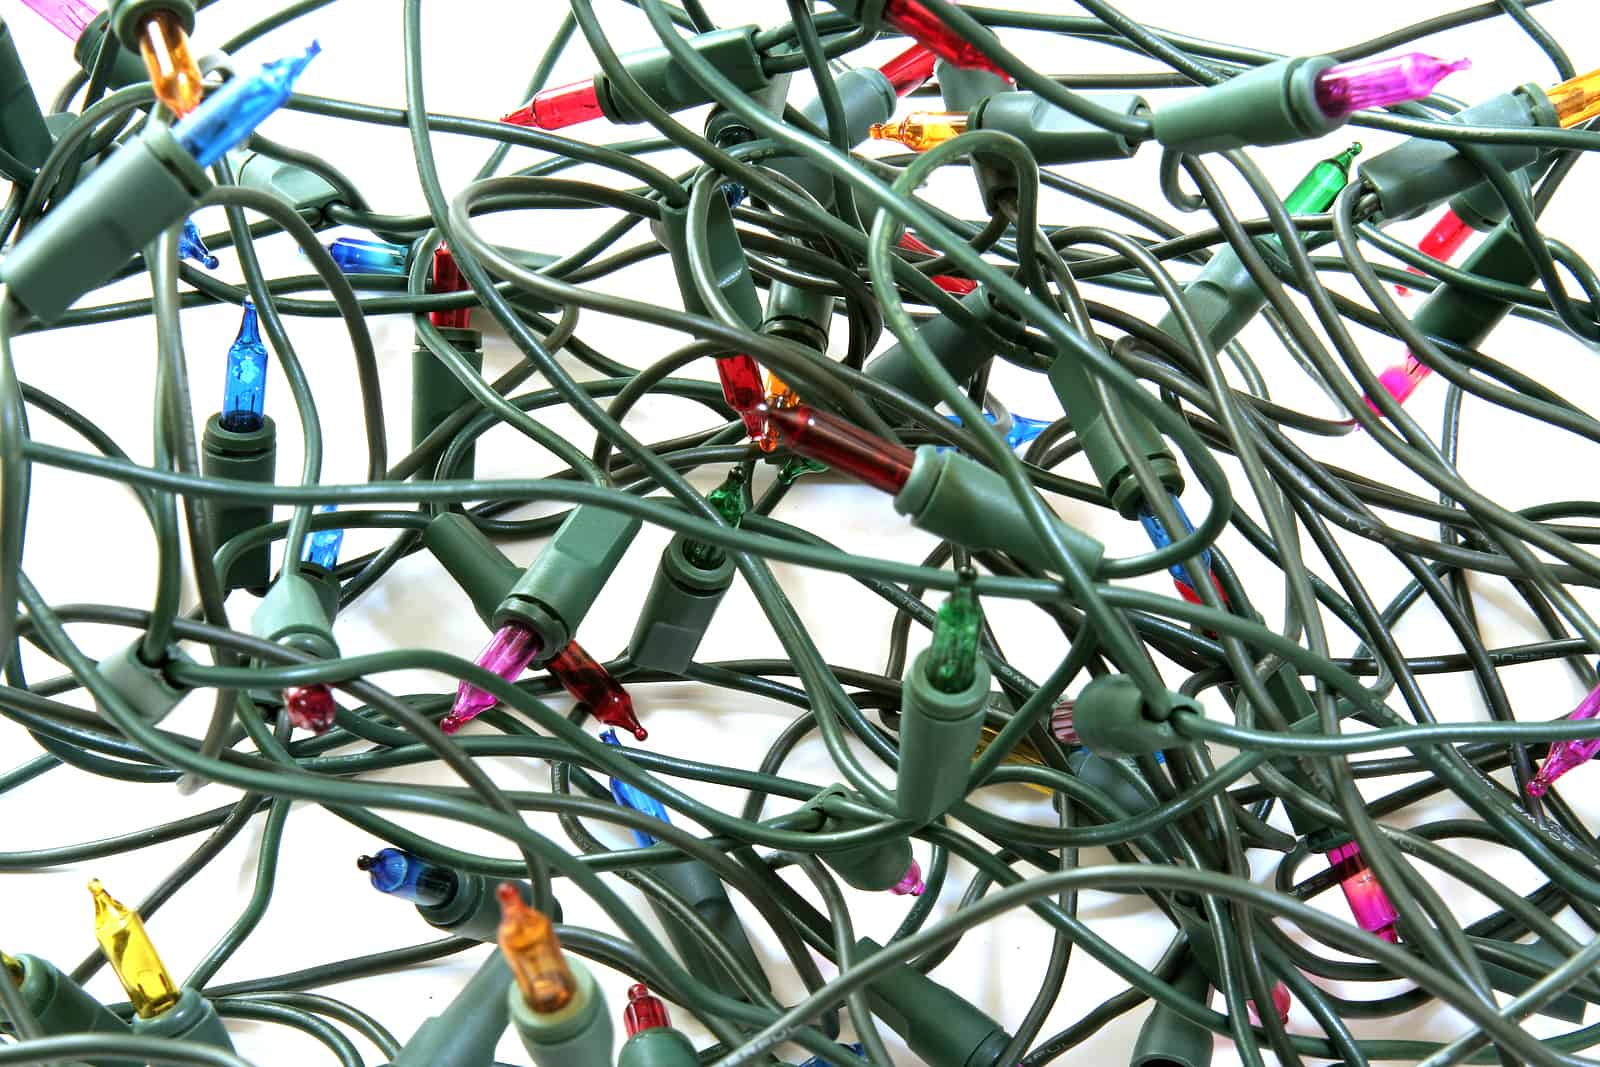 Ditch Those Tangled Lights Once and For All